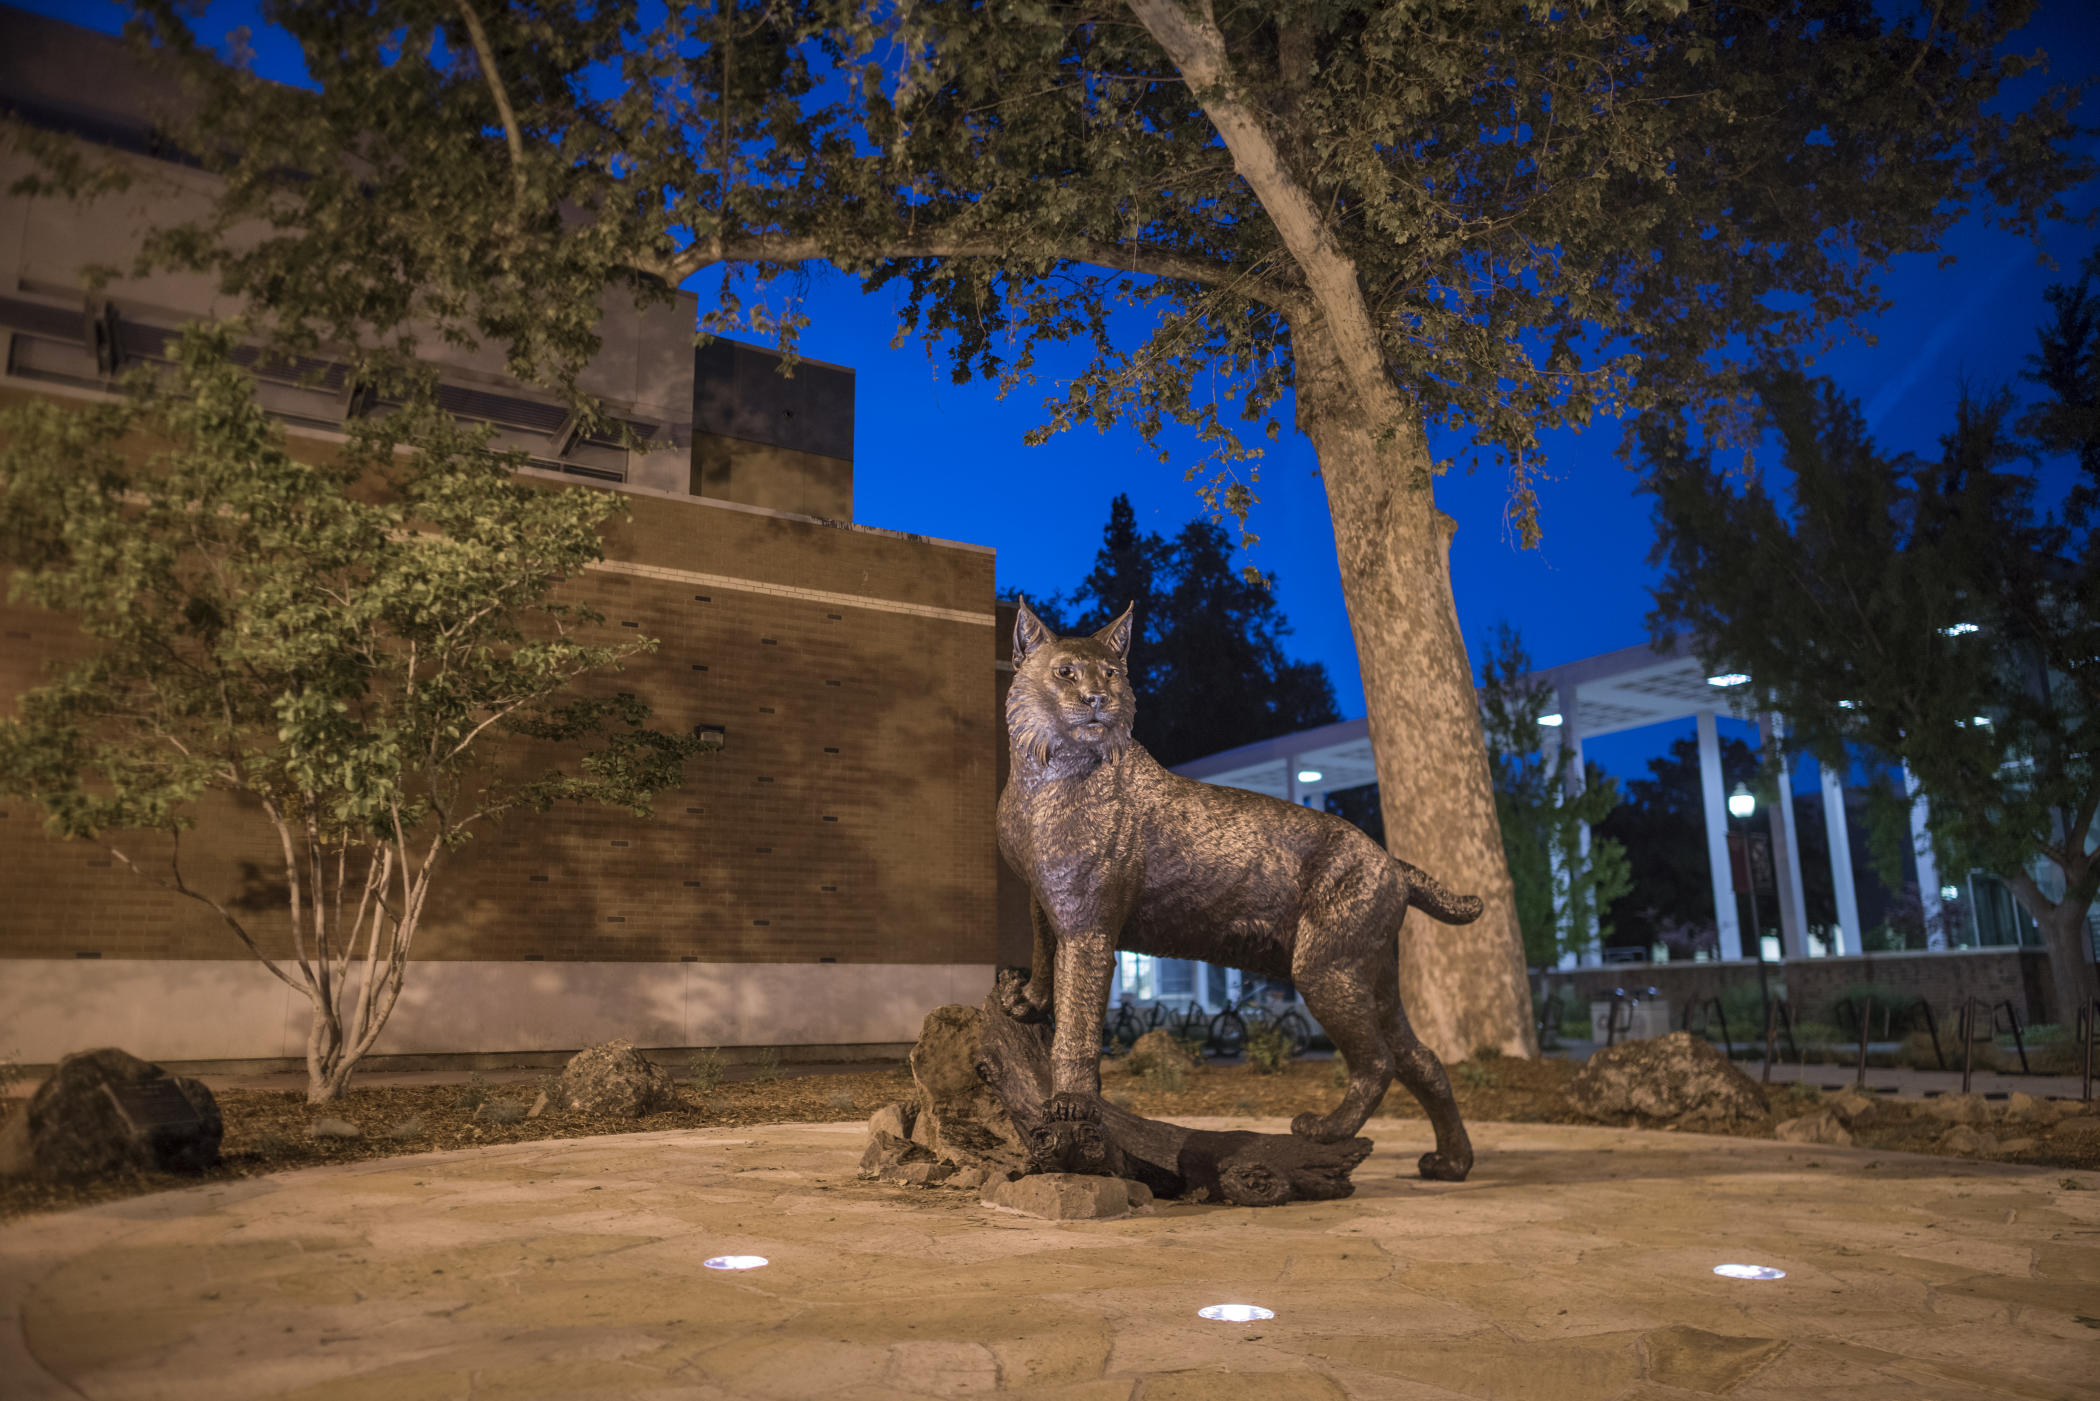 The Wildcat Statue sits proudly in Chico State's Wildcat Plaza.